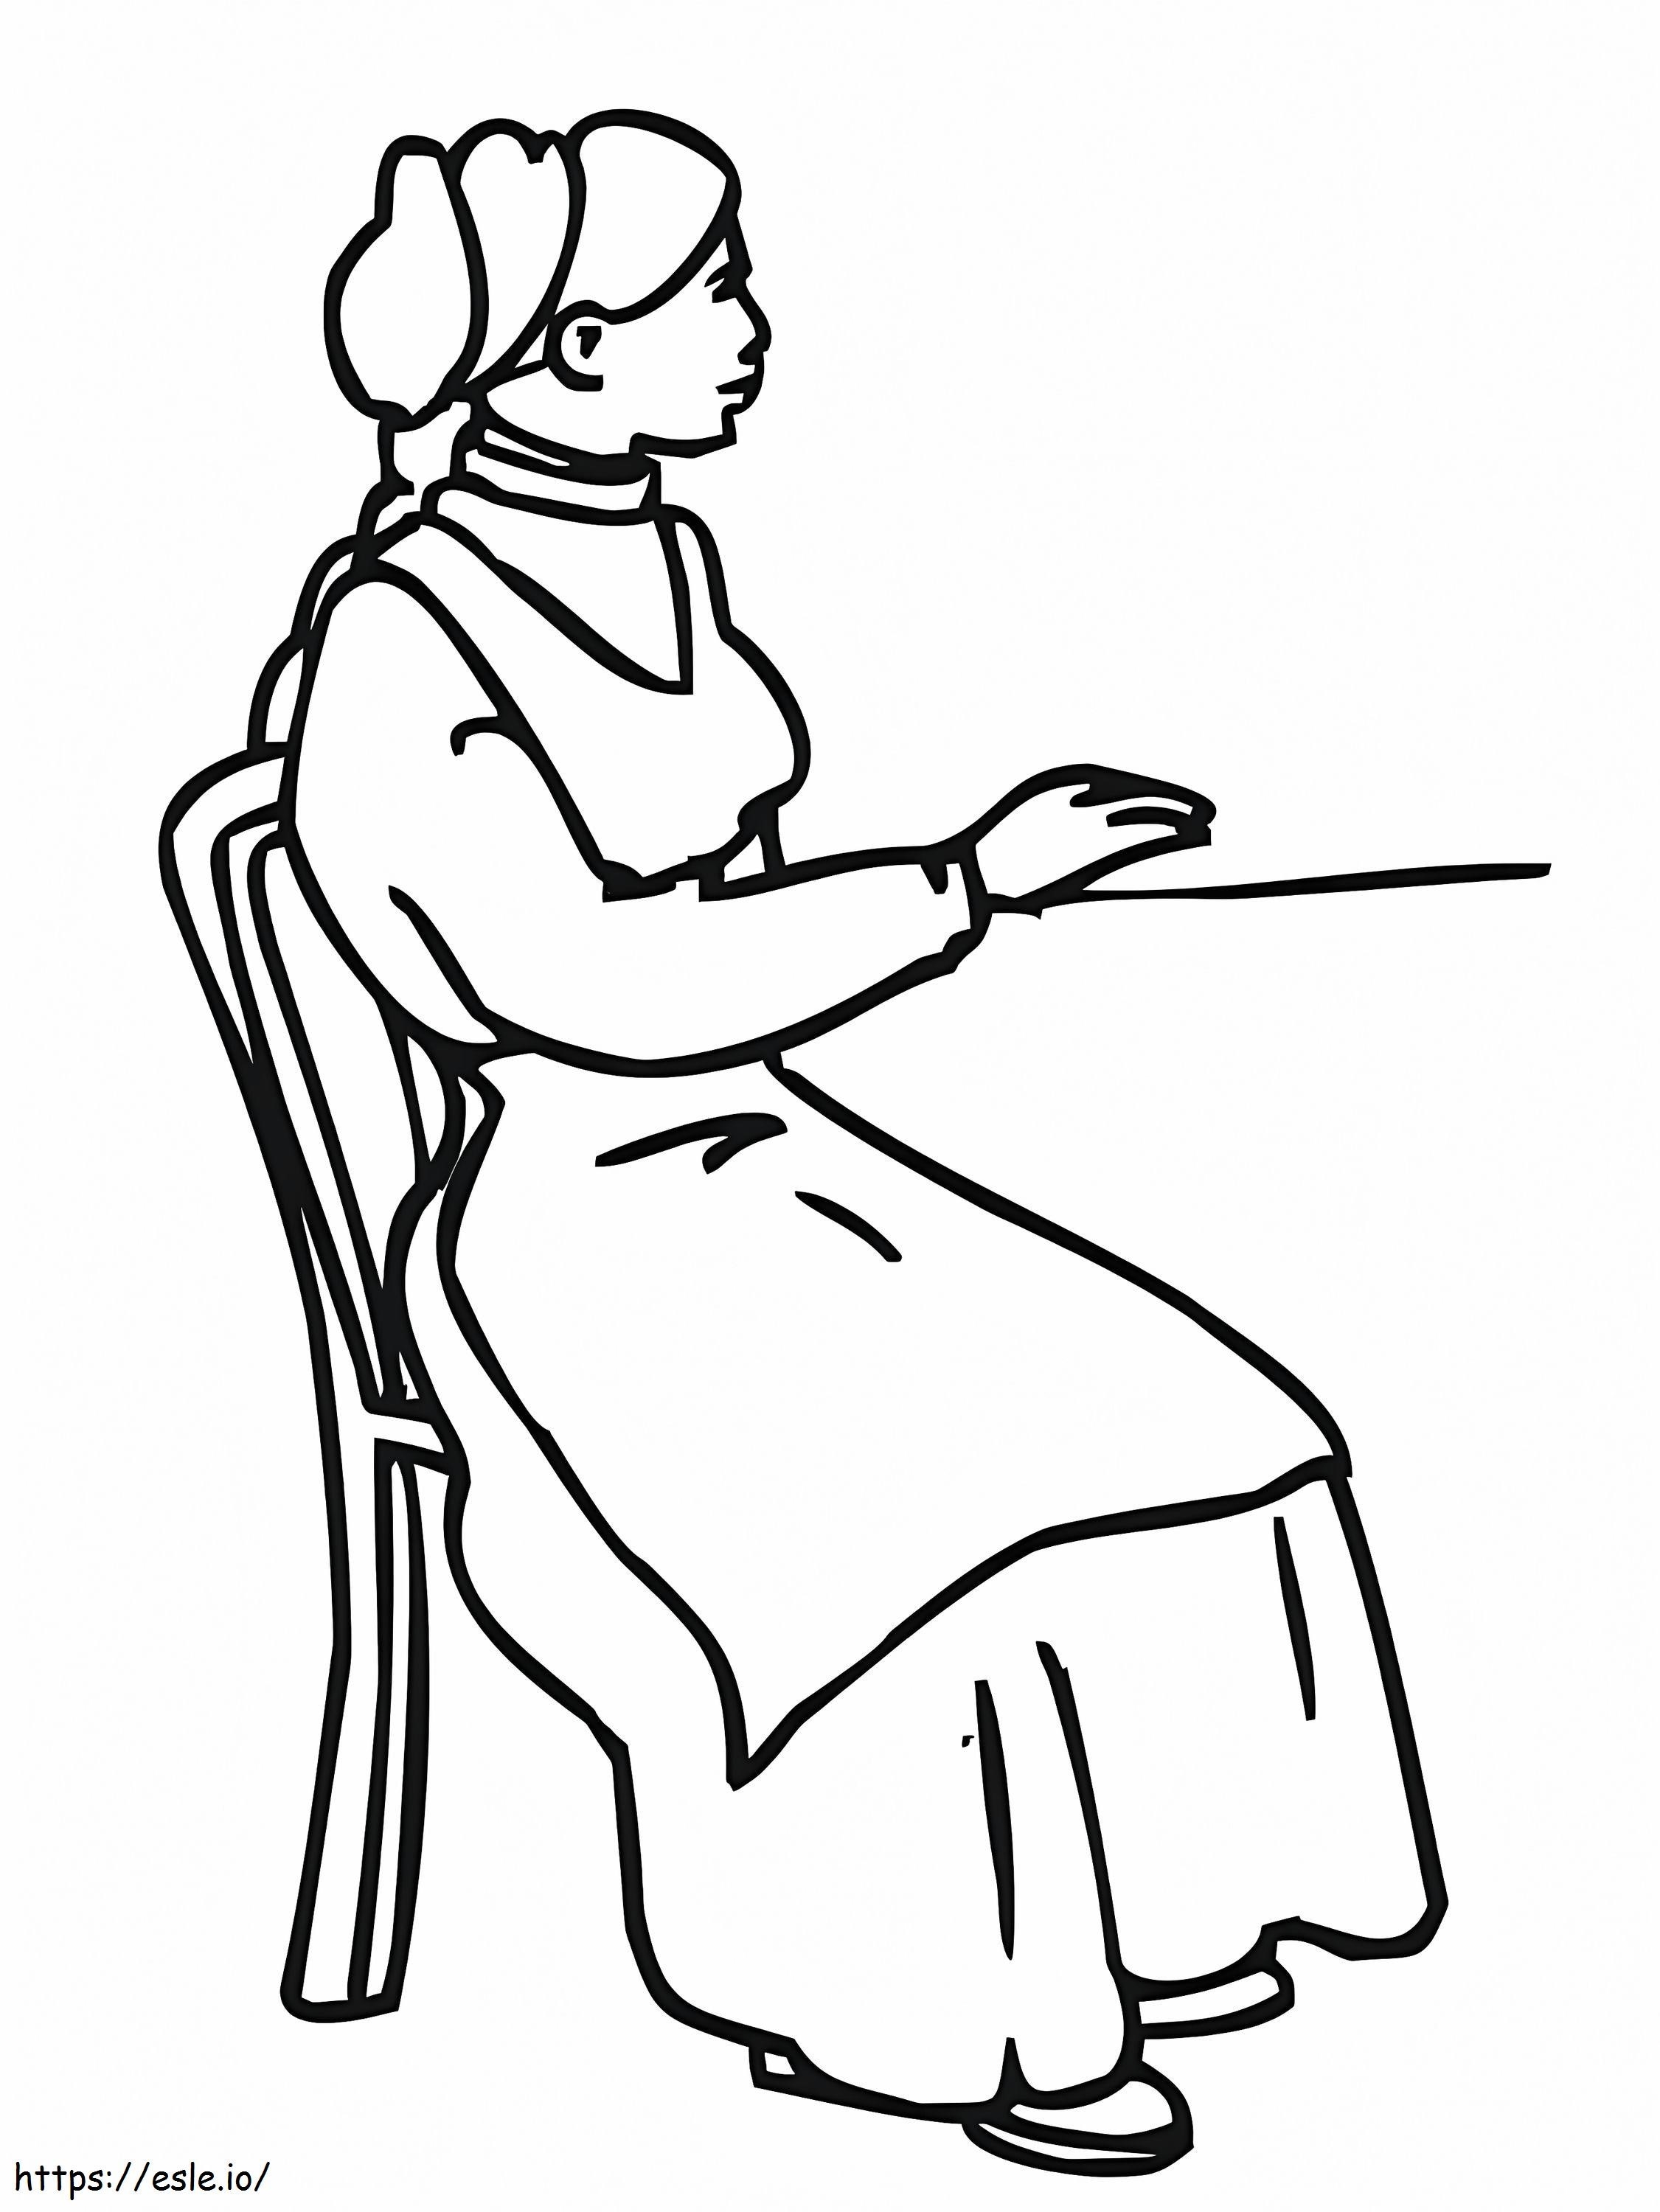 Norway Woman coloring page